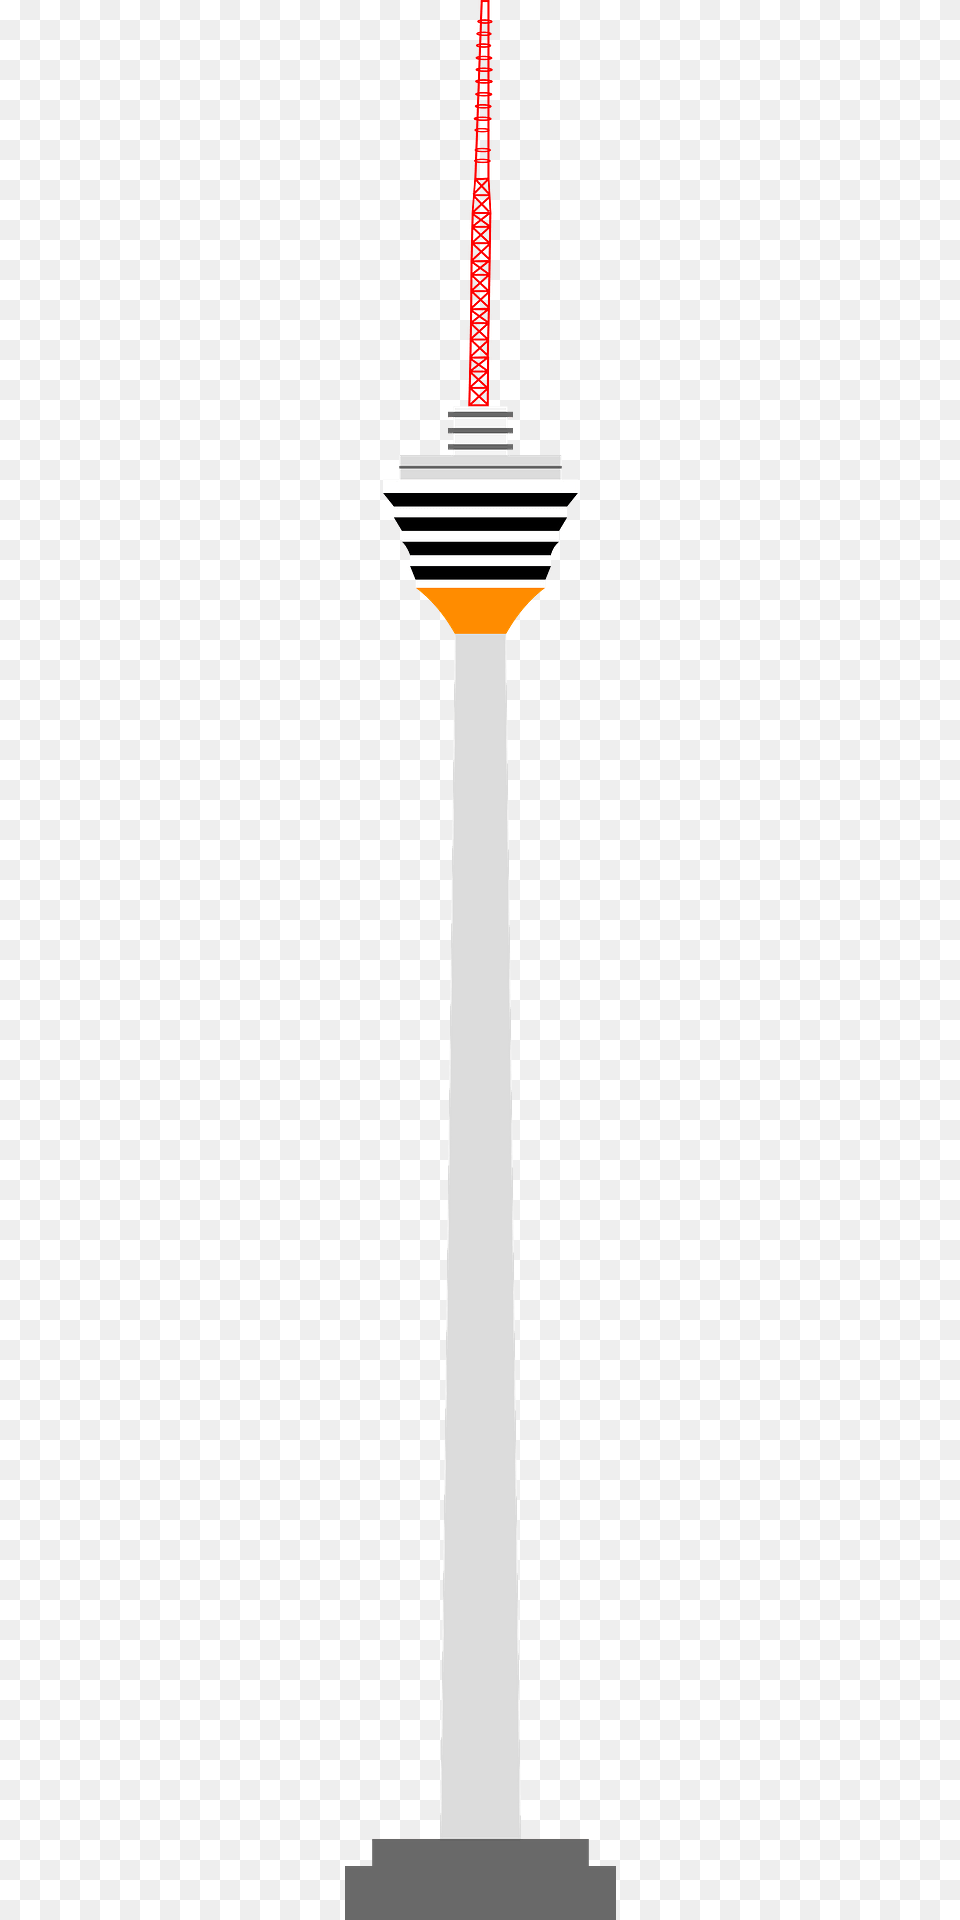 Tower In Kuala Lumpur Clipart, Sword, Weapon Png